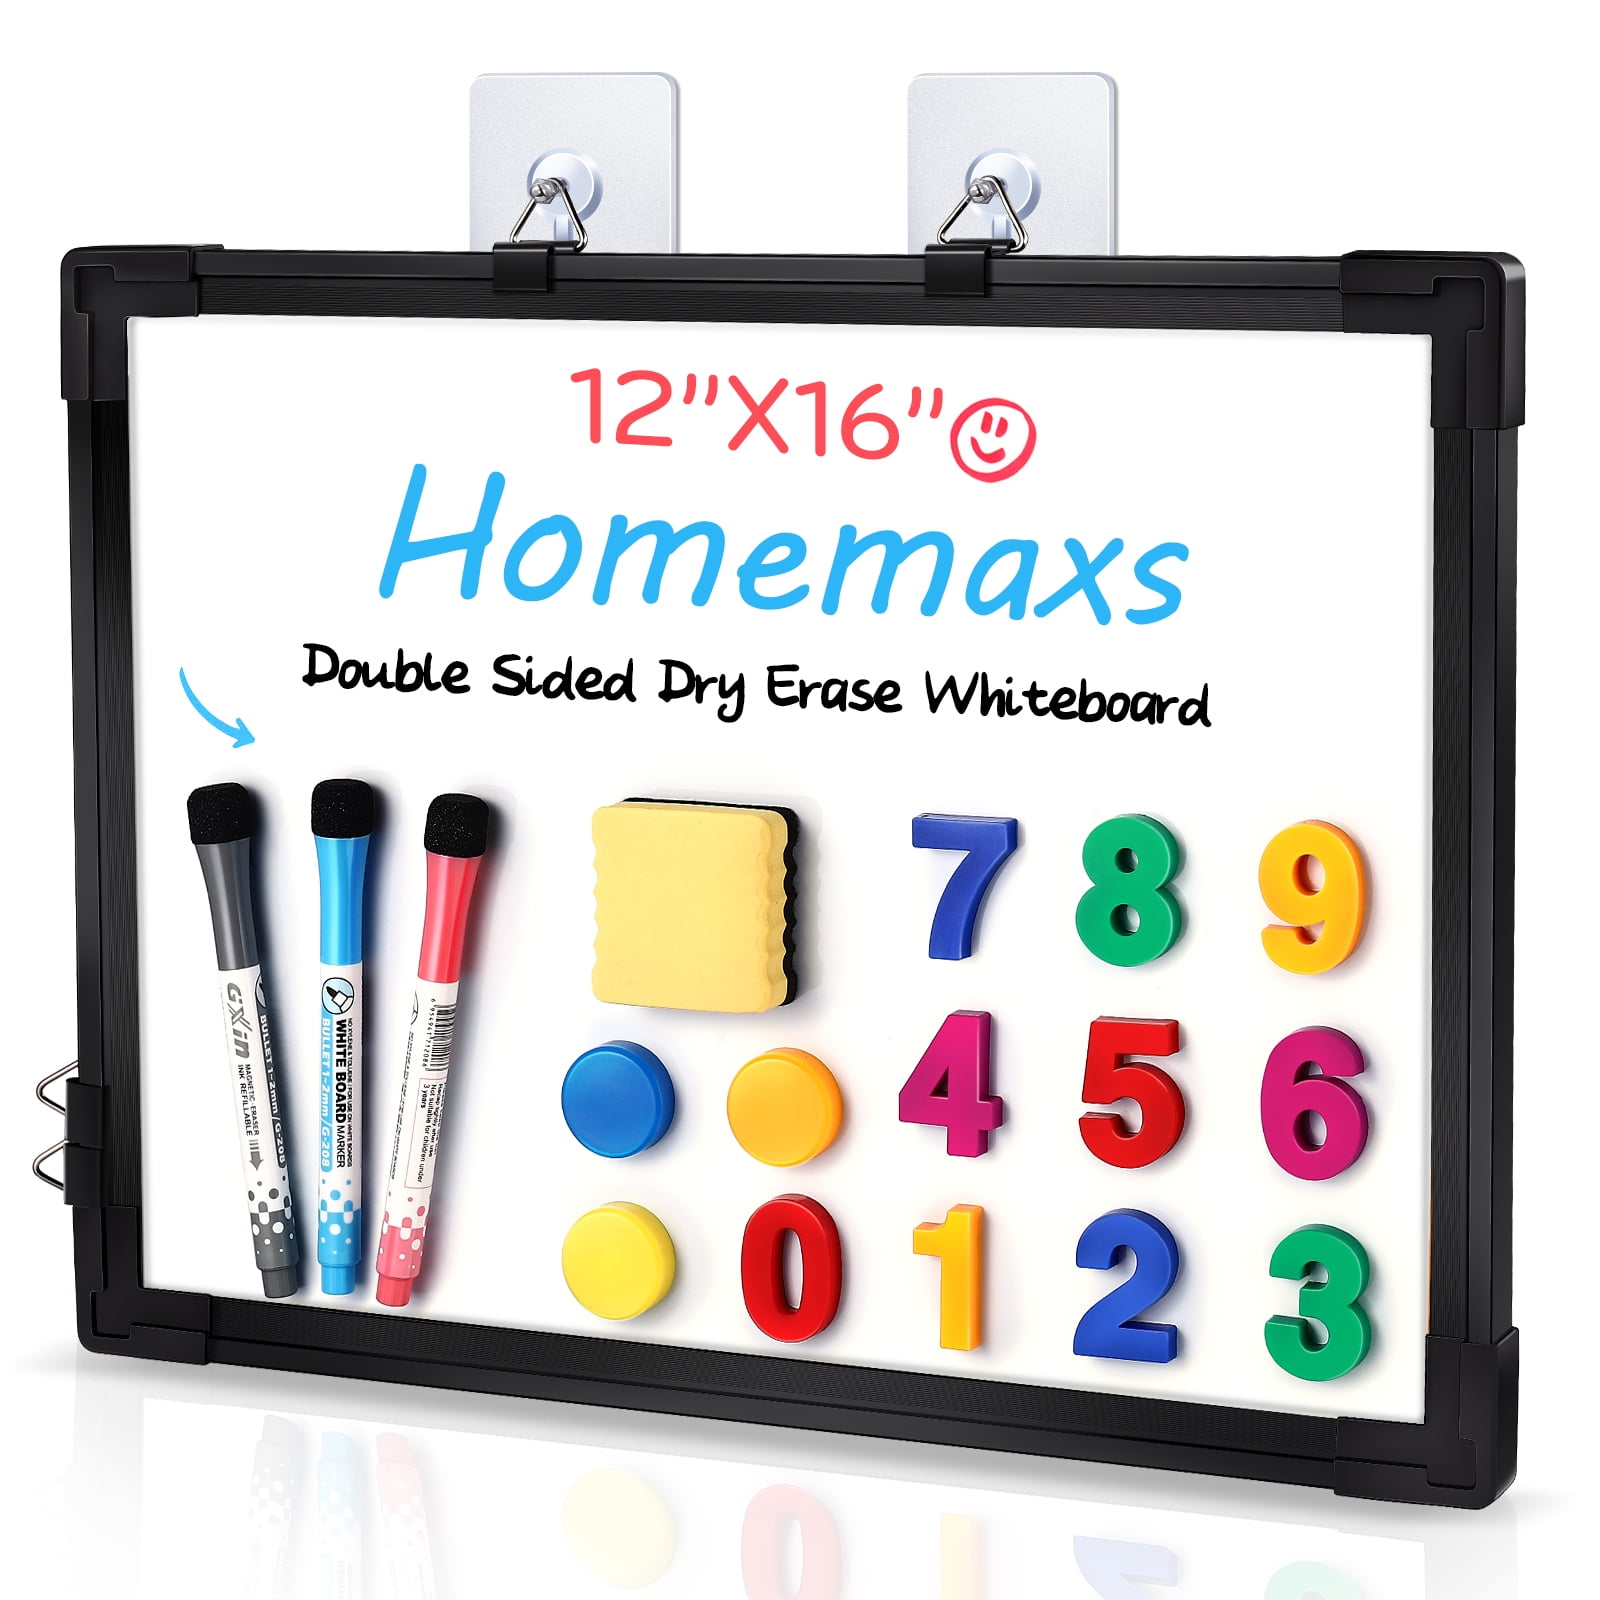 LARGE MAGNETIC WHITEBOARD DRY WIPE DRAWING BOARD&ERASER OFFICE SCHOL NOTICE MEMO 